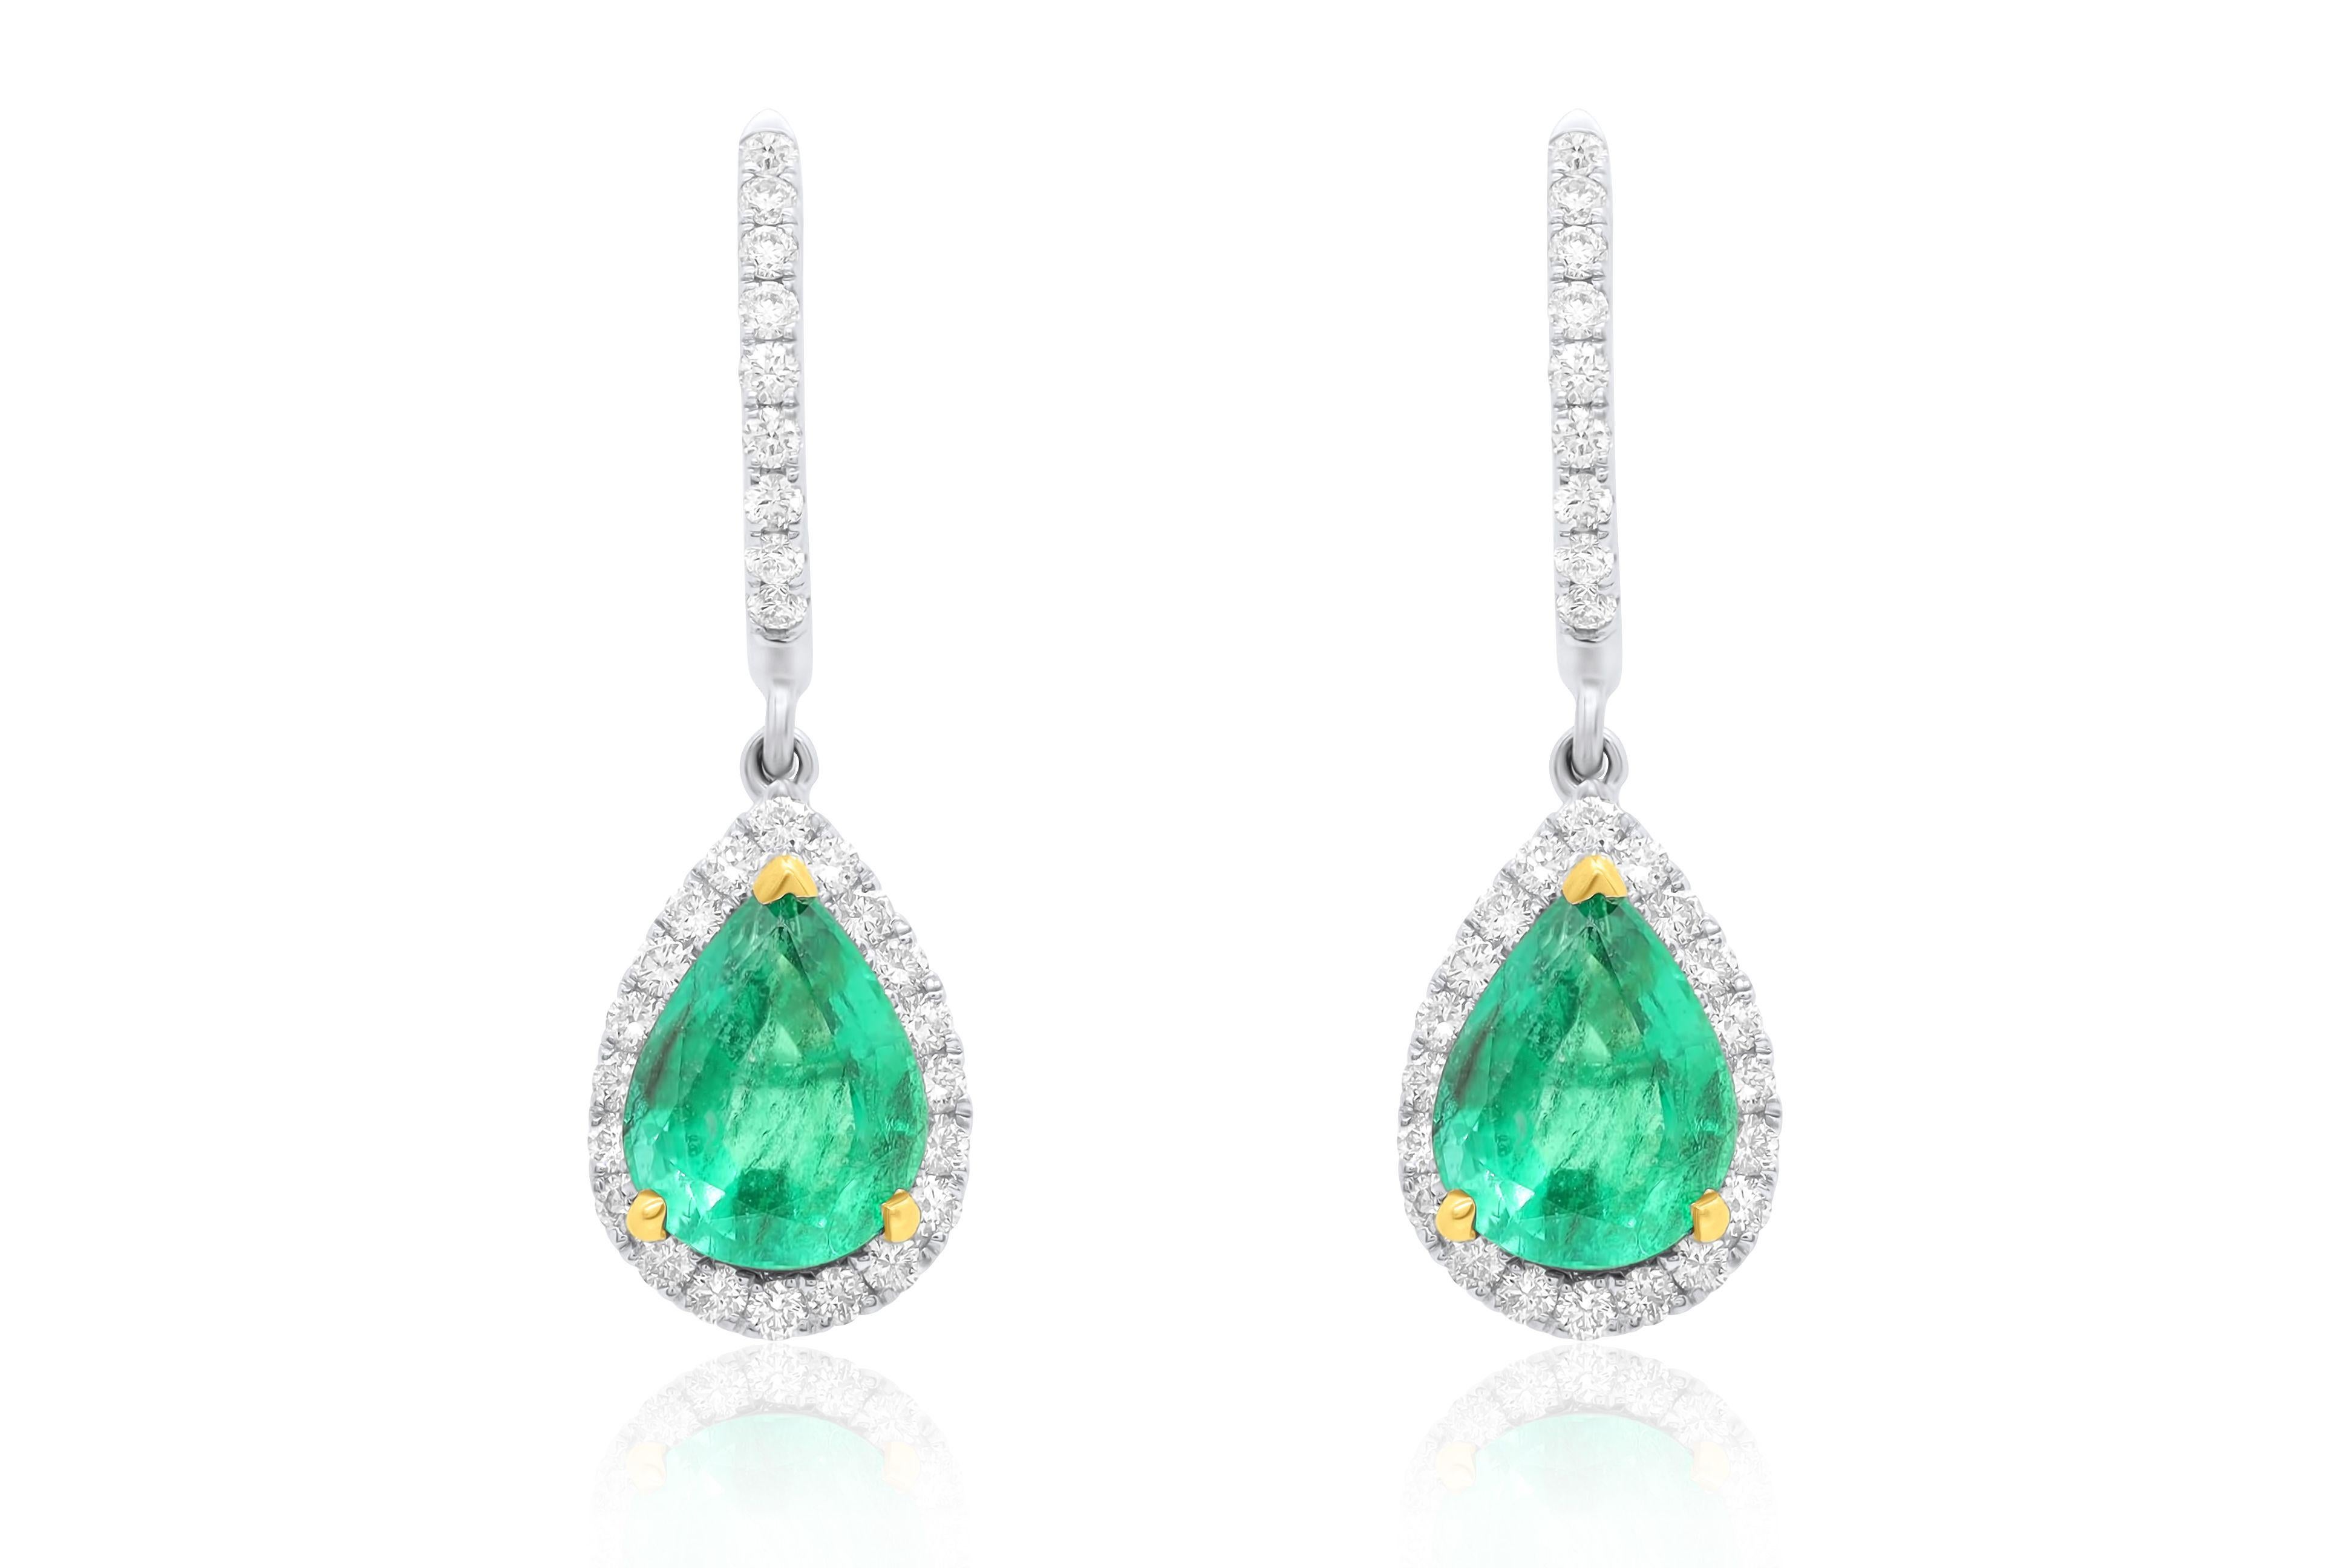 Diana M. 2.88 Carat Pear Shaped Emerald and Diamond Drop Earrings In New Condition For Sale In New York, NY